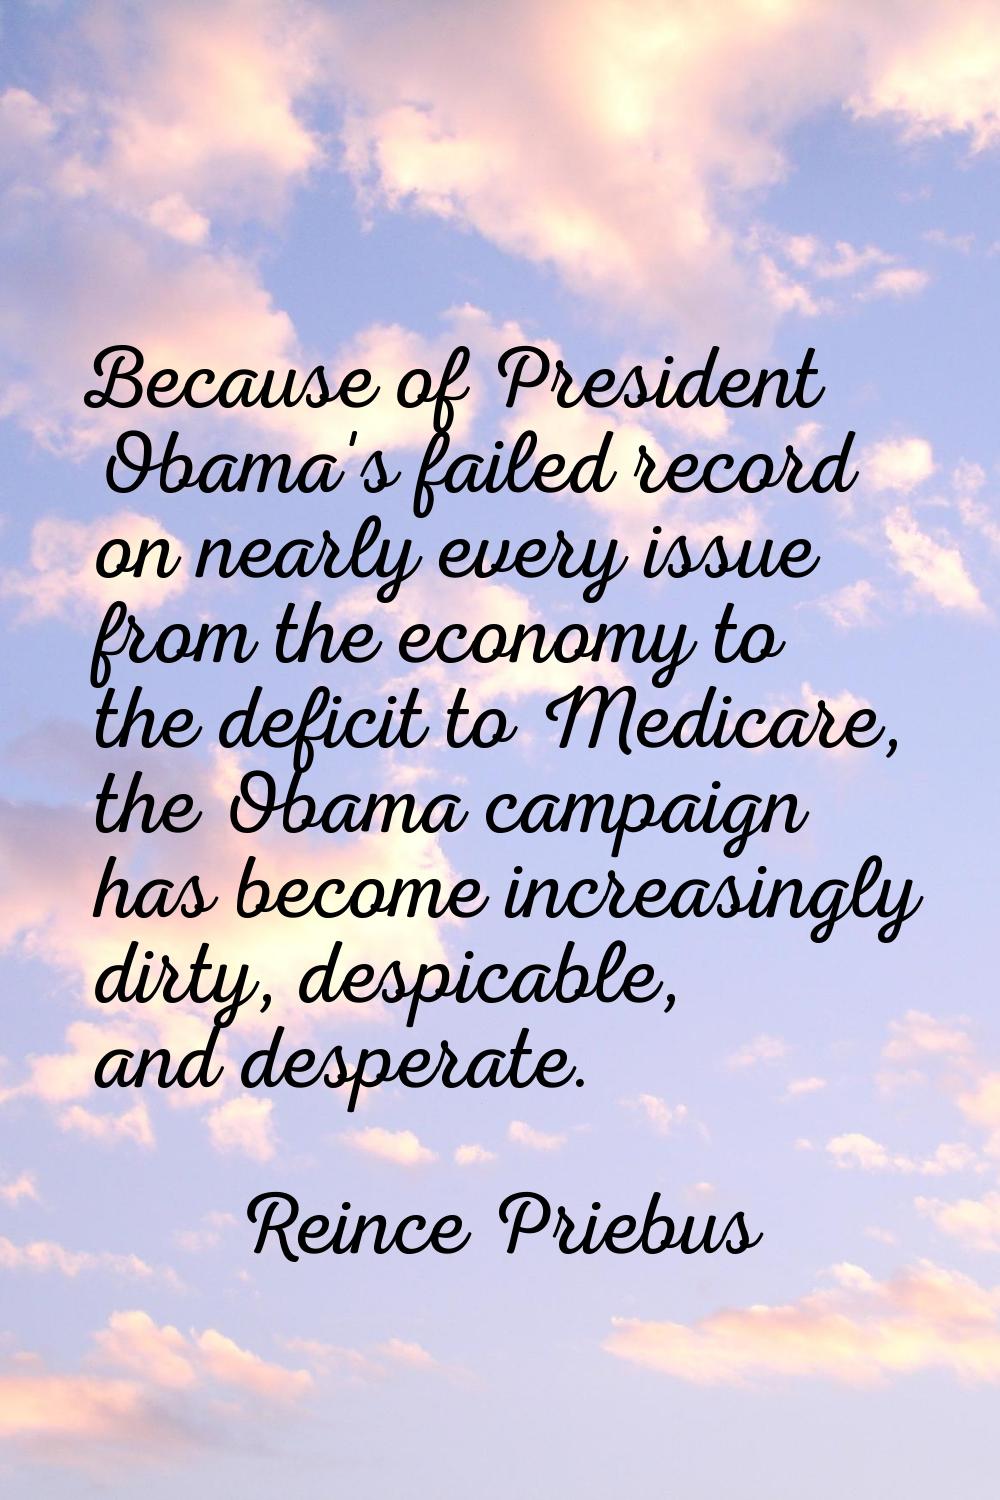 Because of President Obama's failed record on nearly every issue from the economy to the deficit to